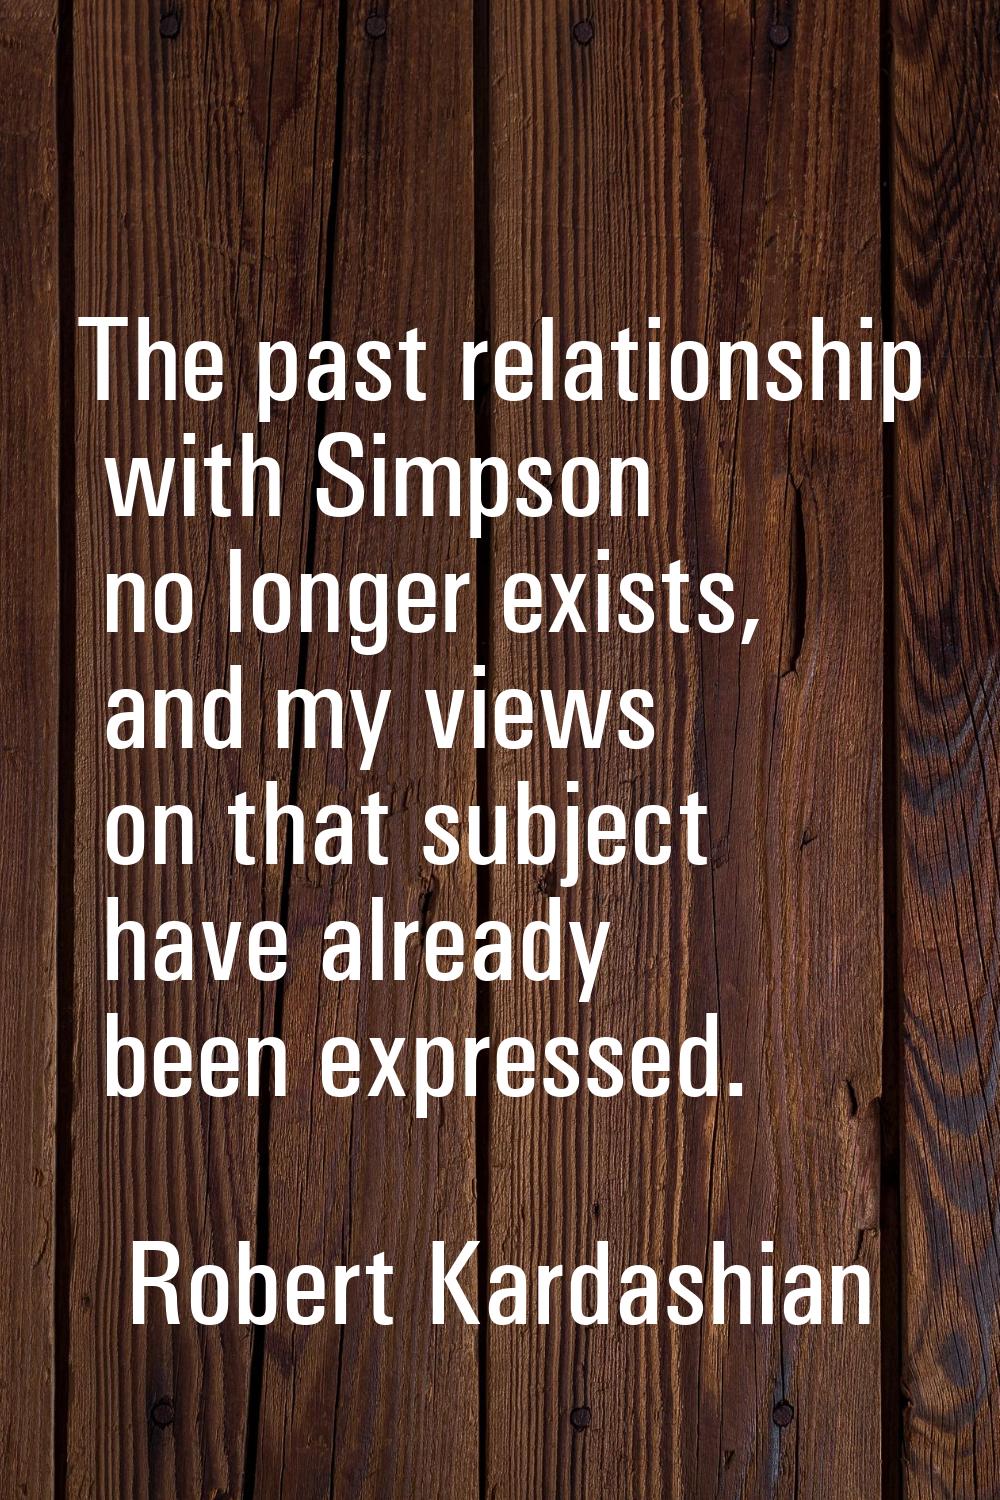 The past relationship with Simpson no longer exists, and my views on that subject have already been